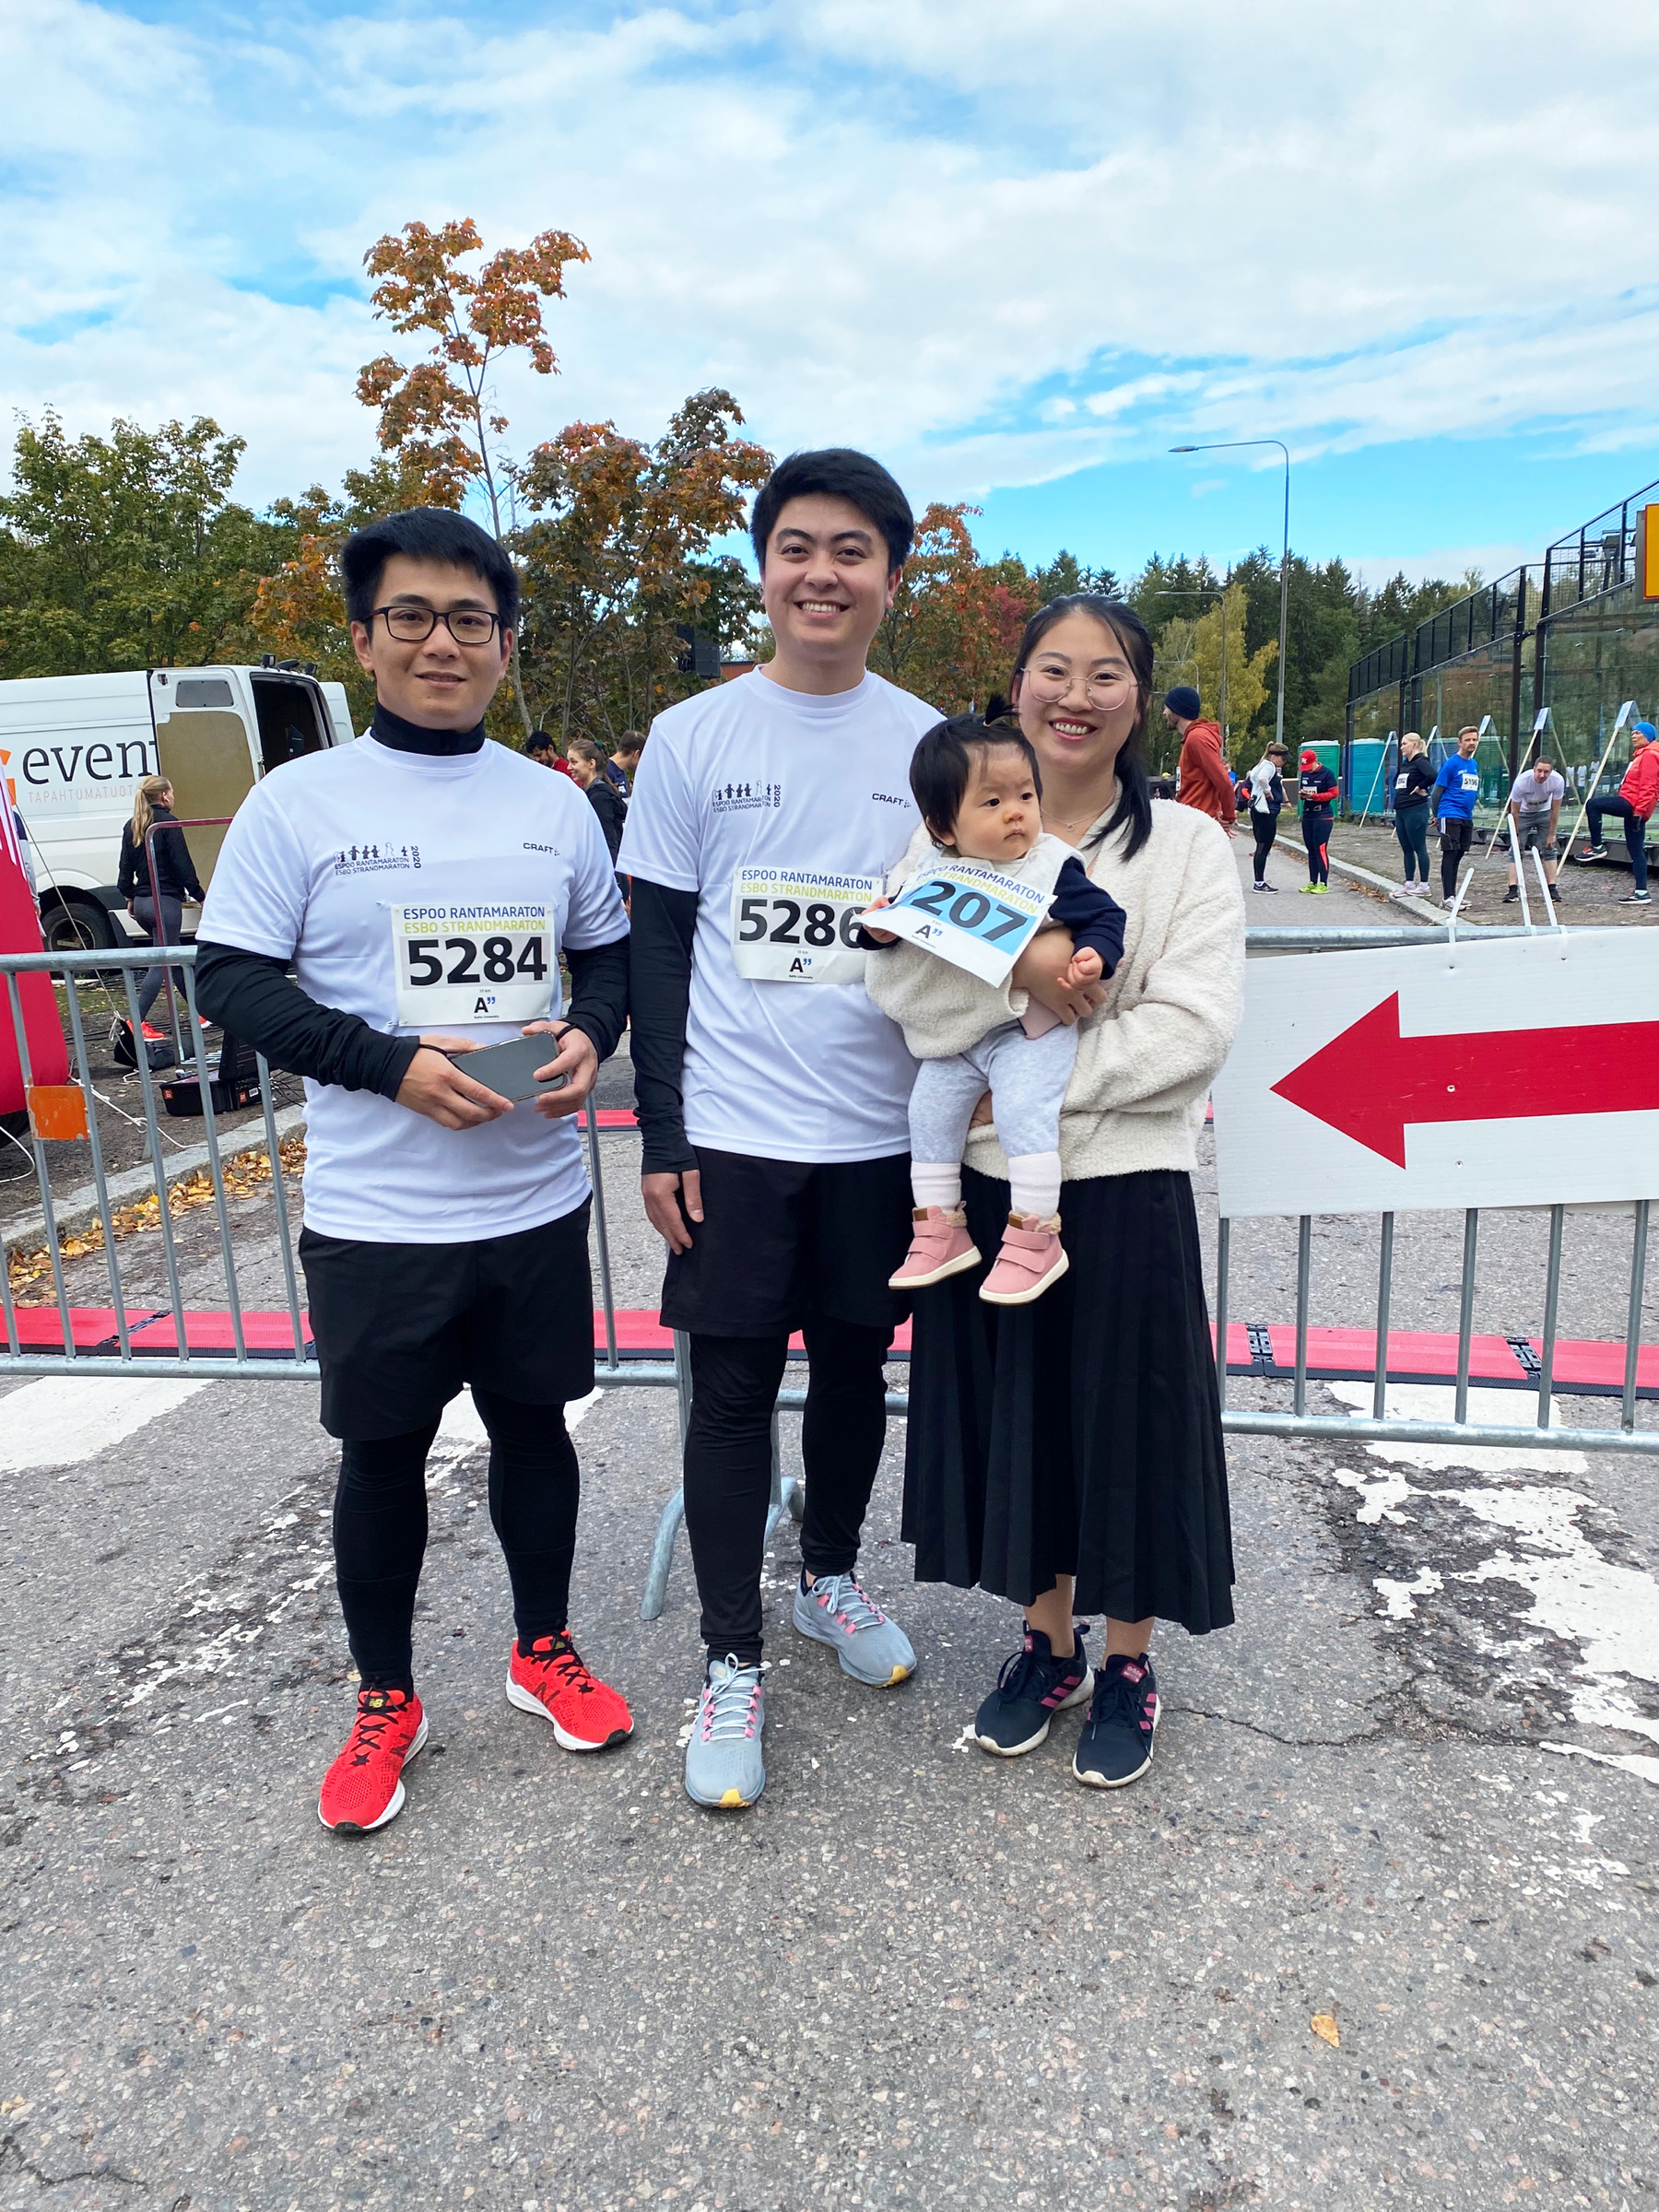 A family taking part in the Aalto 10K & 5K event in September 2022